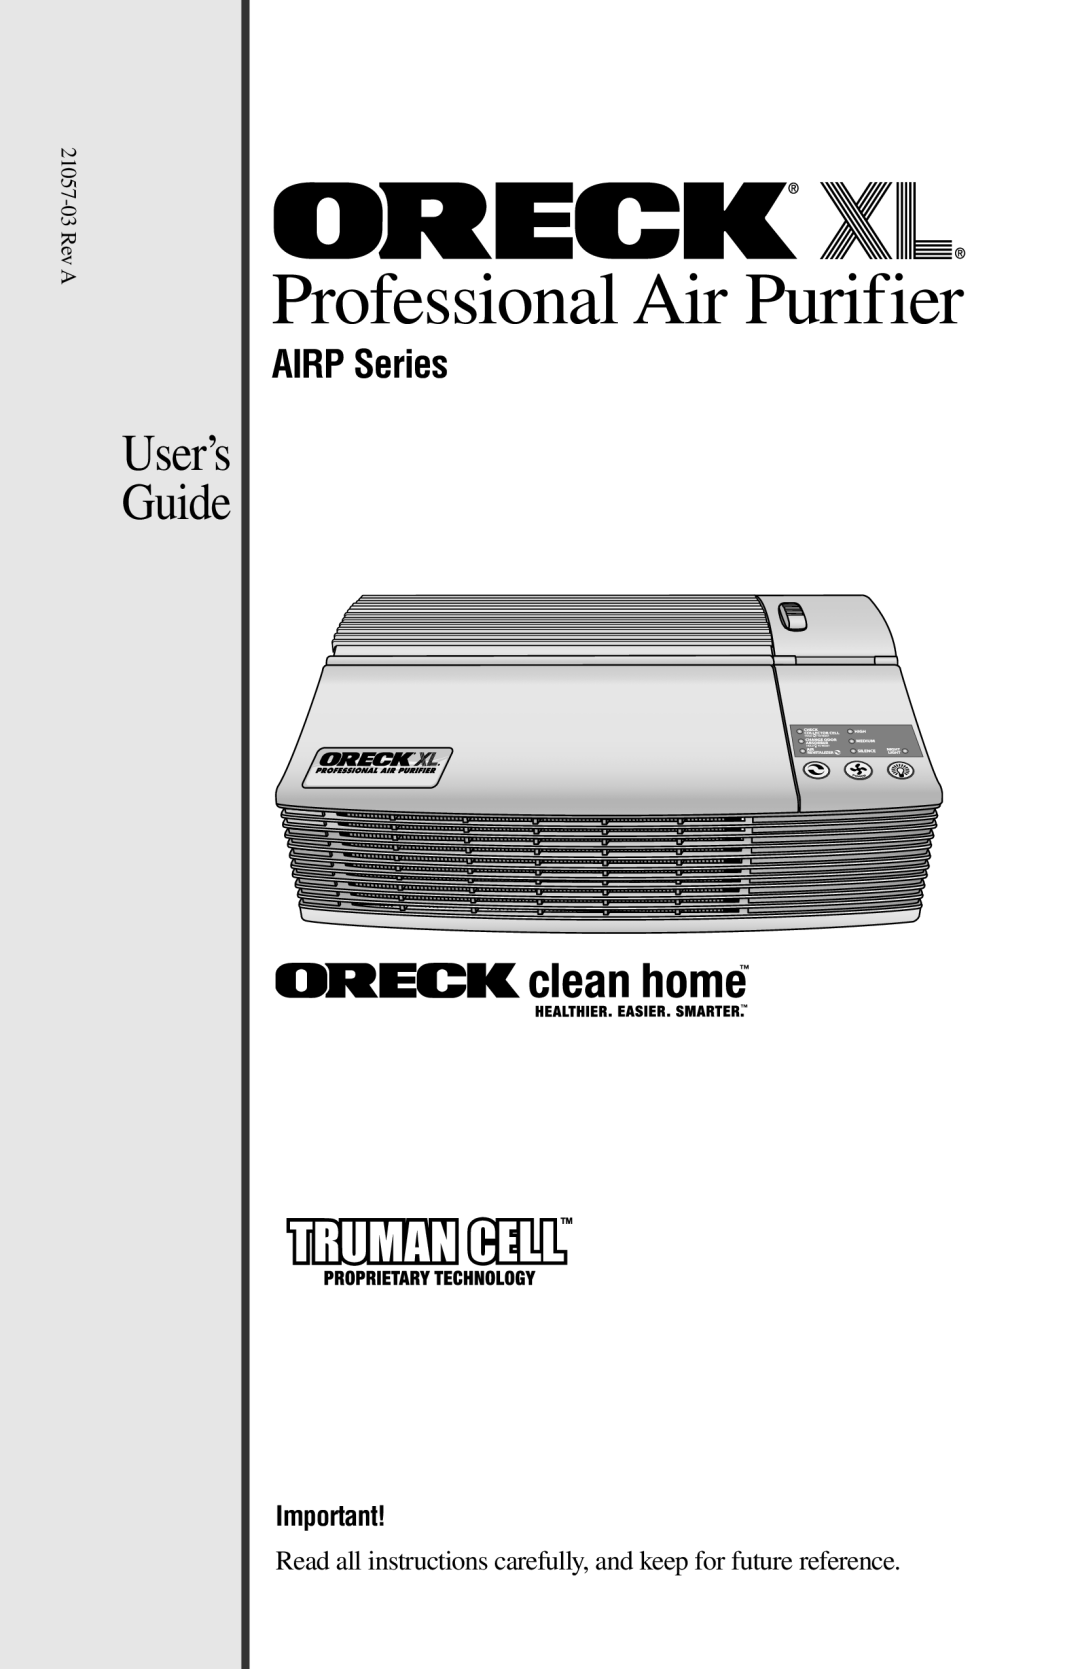 Oreck 21057-03 manual AIRP Series, Professional Air Purifier, User’s Guide 